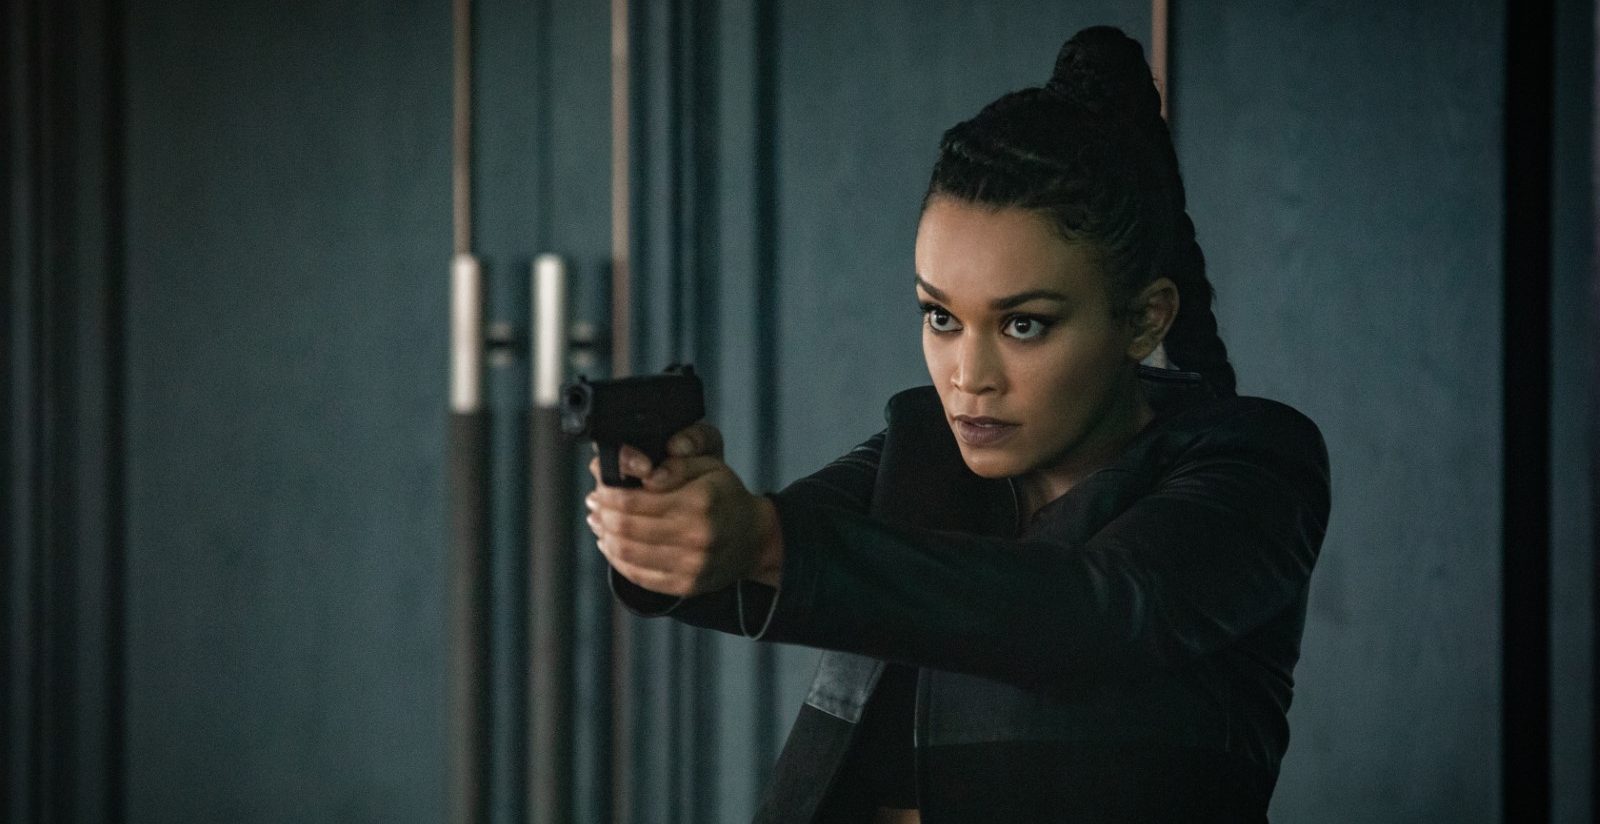 Is Fistful of Vengeance Wu Assassins’s Sequel or Spin-Off?